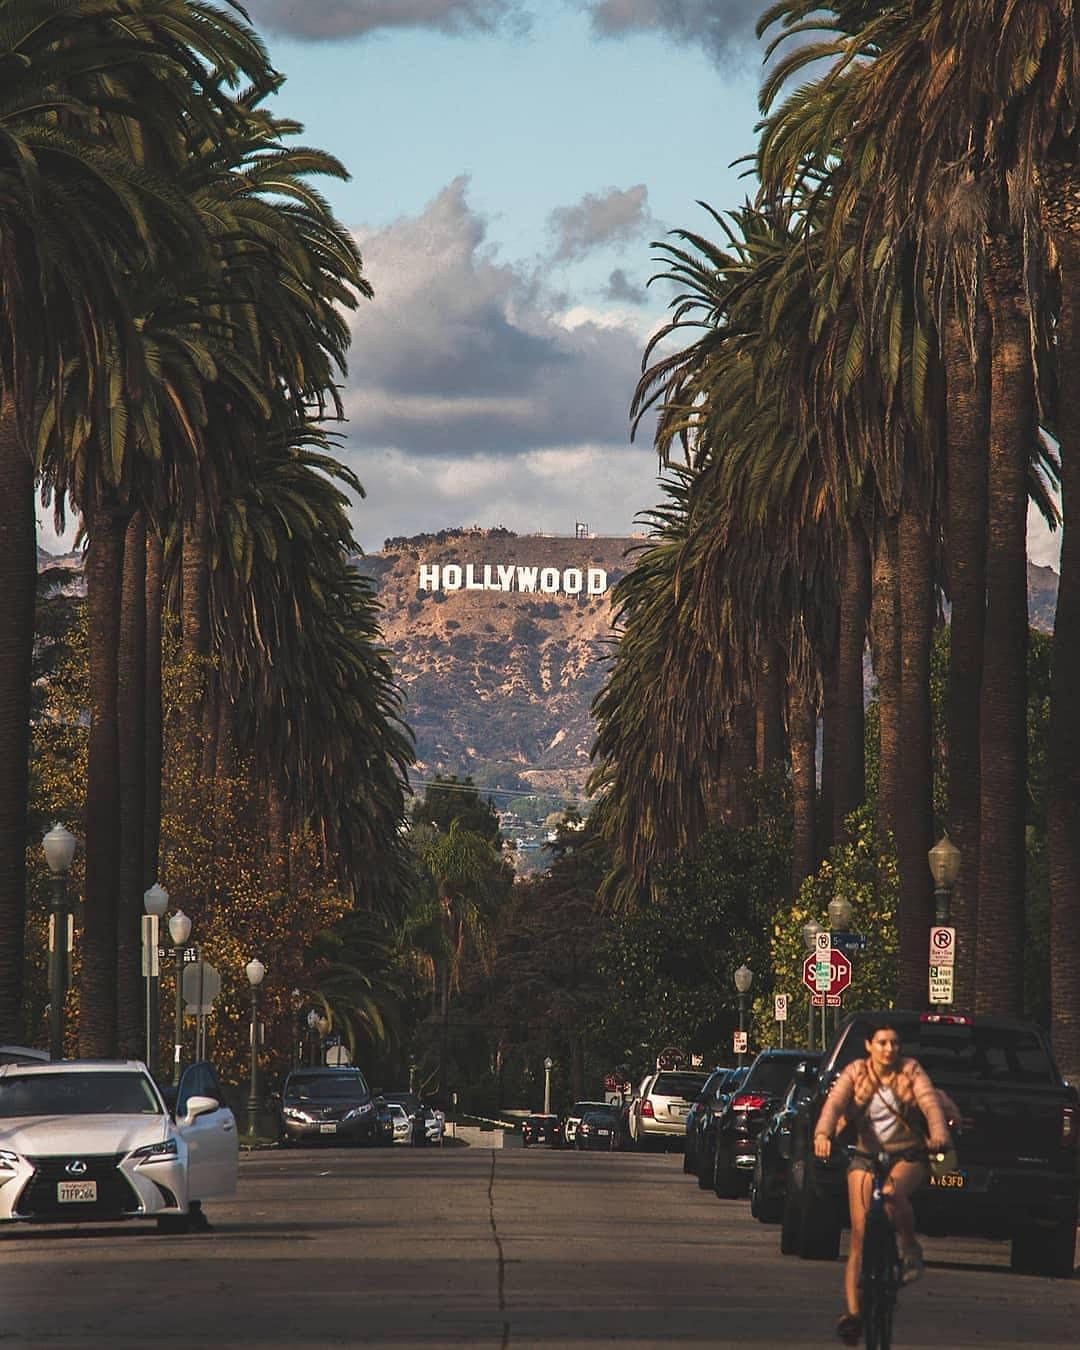 Hollywood Street Signage View Wallpaper